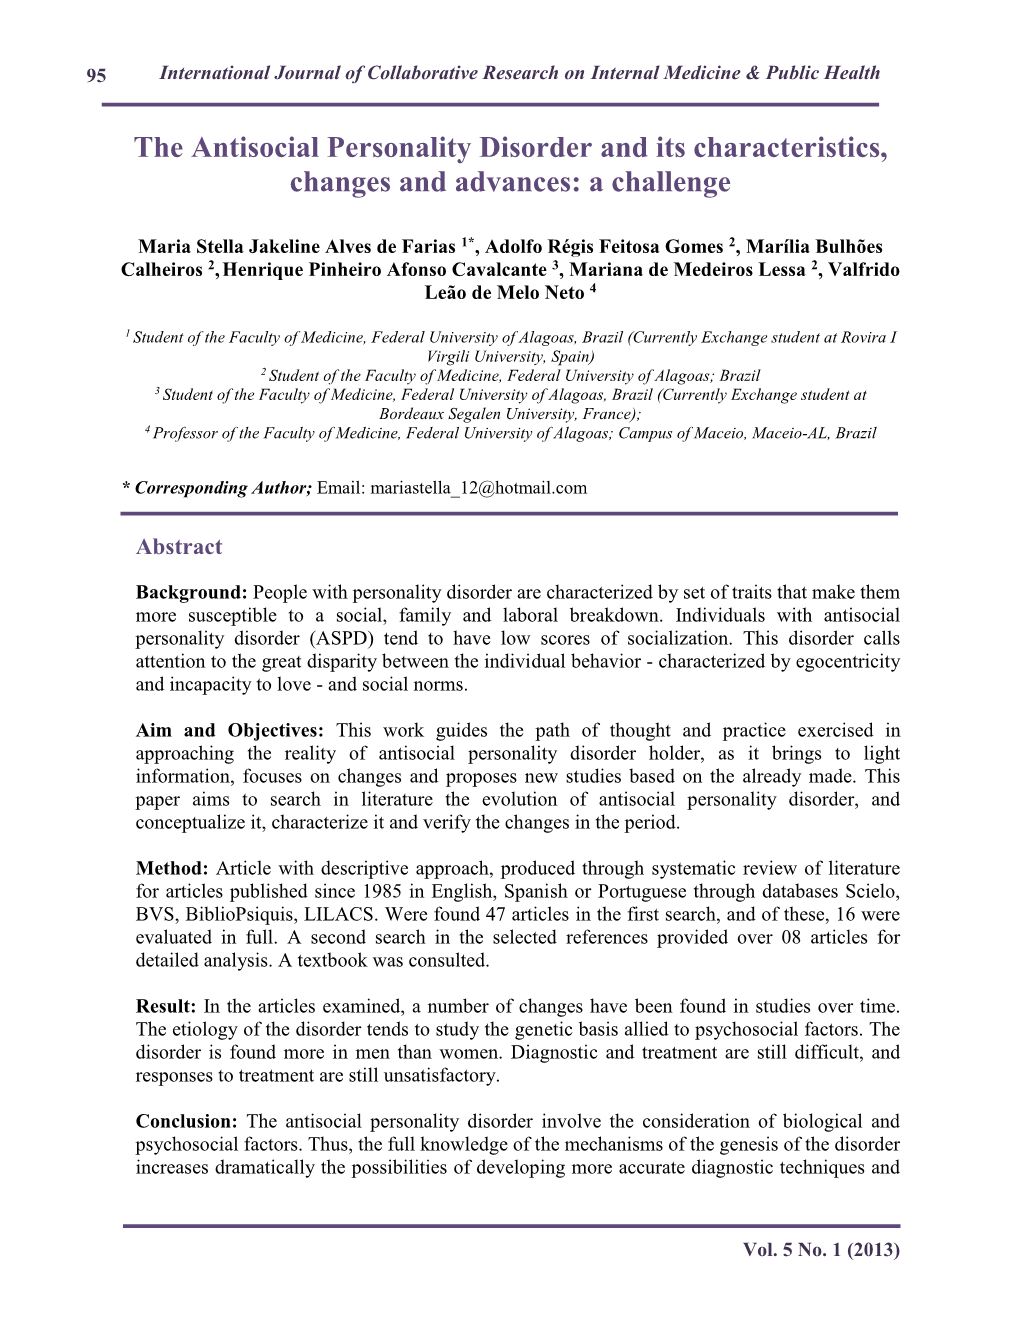 The Antisocial Personality Disorder and Its Characteristics, Changes and Advances: a Challenge